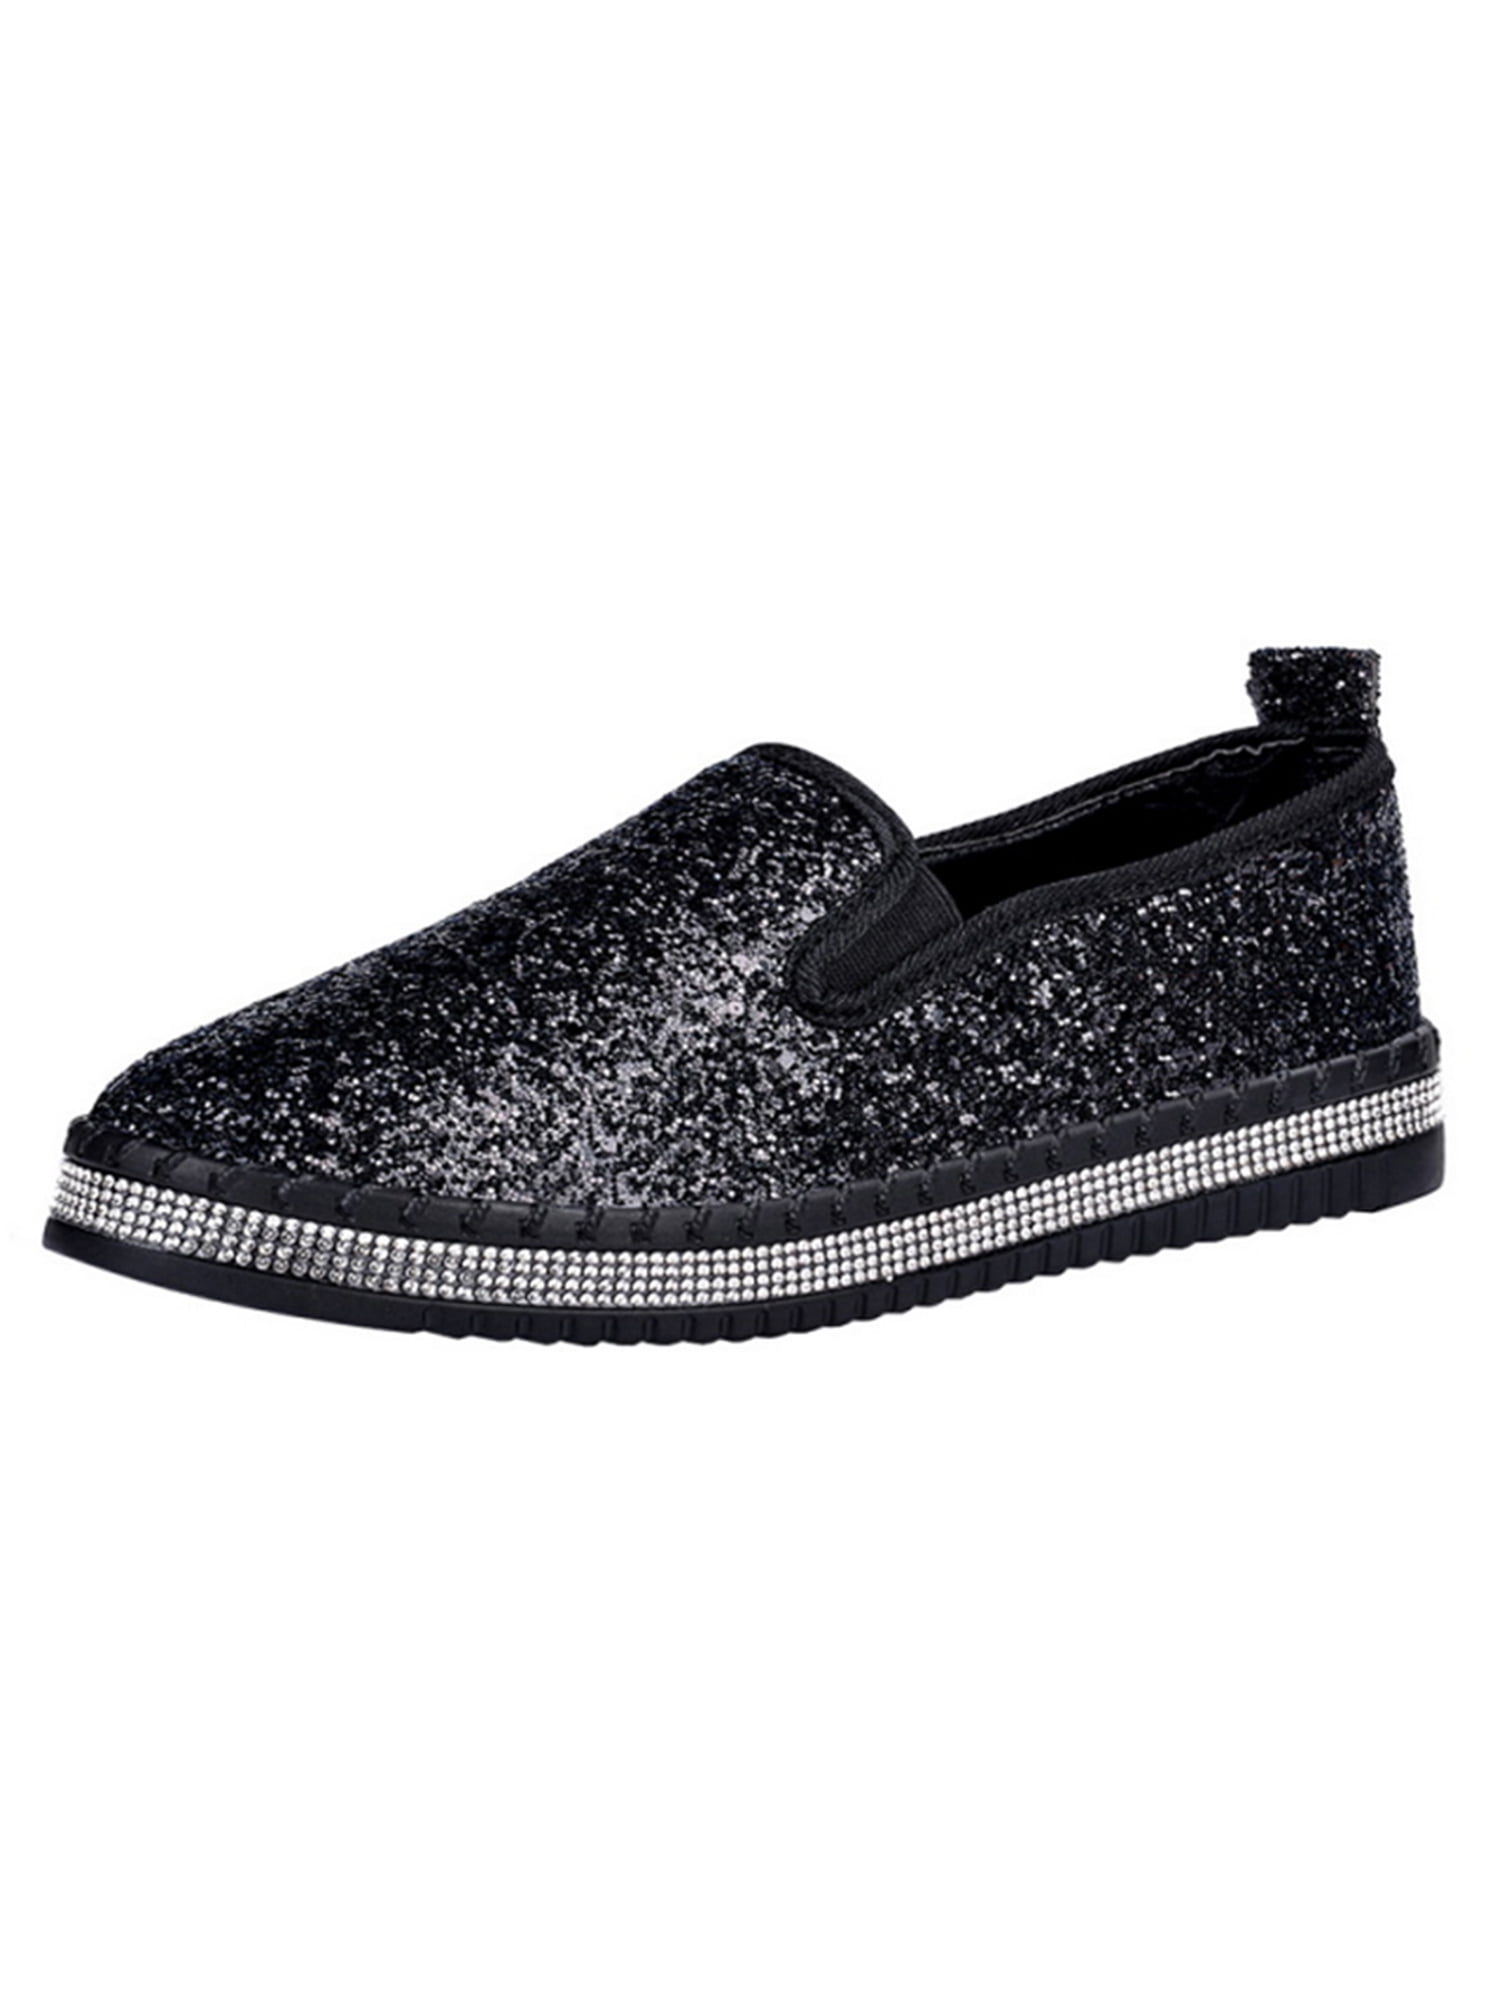 Cute Women's Bling  Glitter Sequin Slip On Cartoon Sneakers Casual Loafer Shoes 